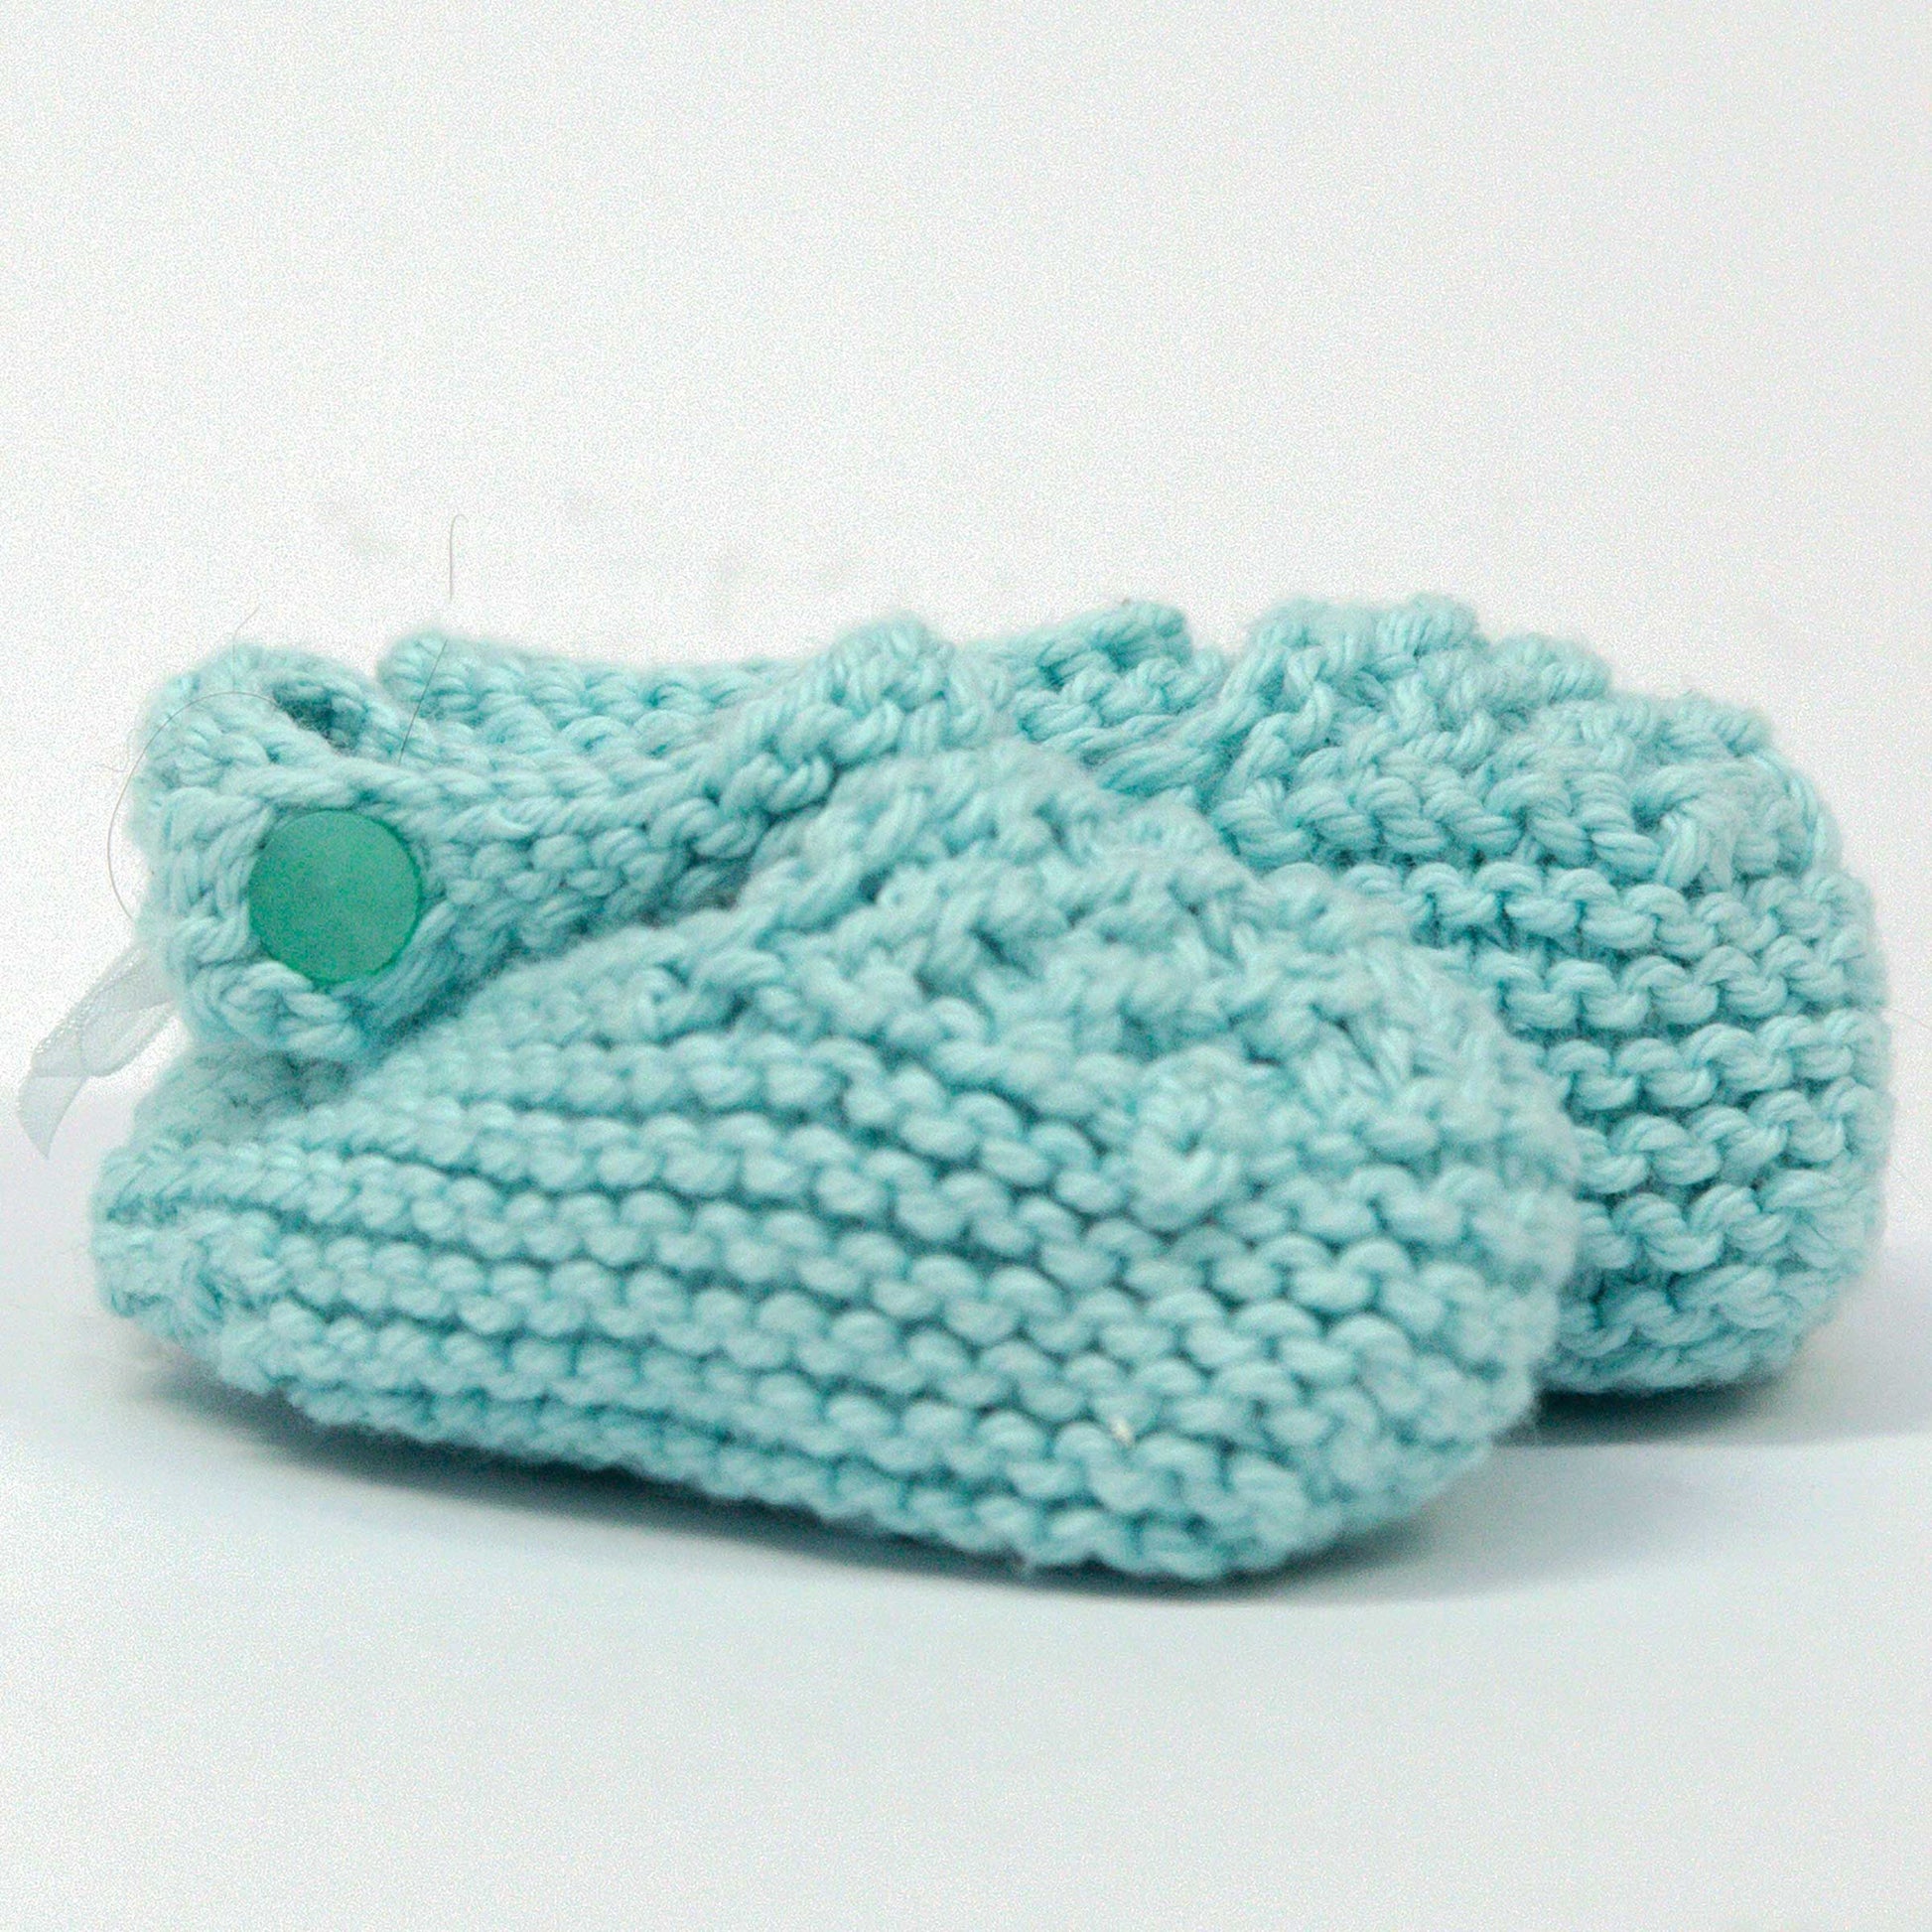 Mary Jane shoes, Hand Knit, 100% Cotton, Custo buttons, washable, Teal Glitter, Teal Buttons